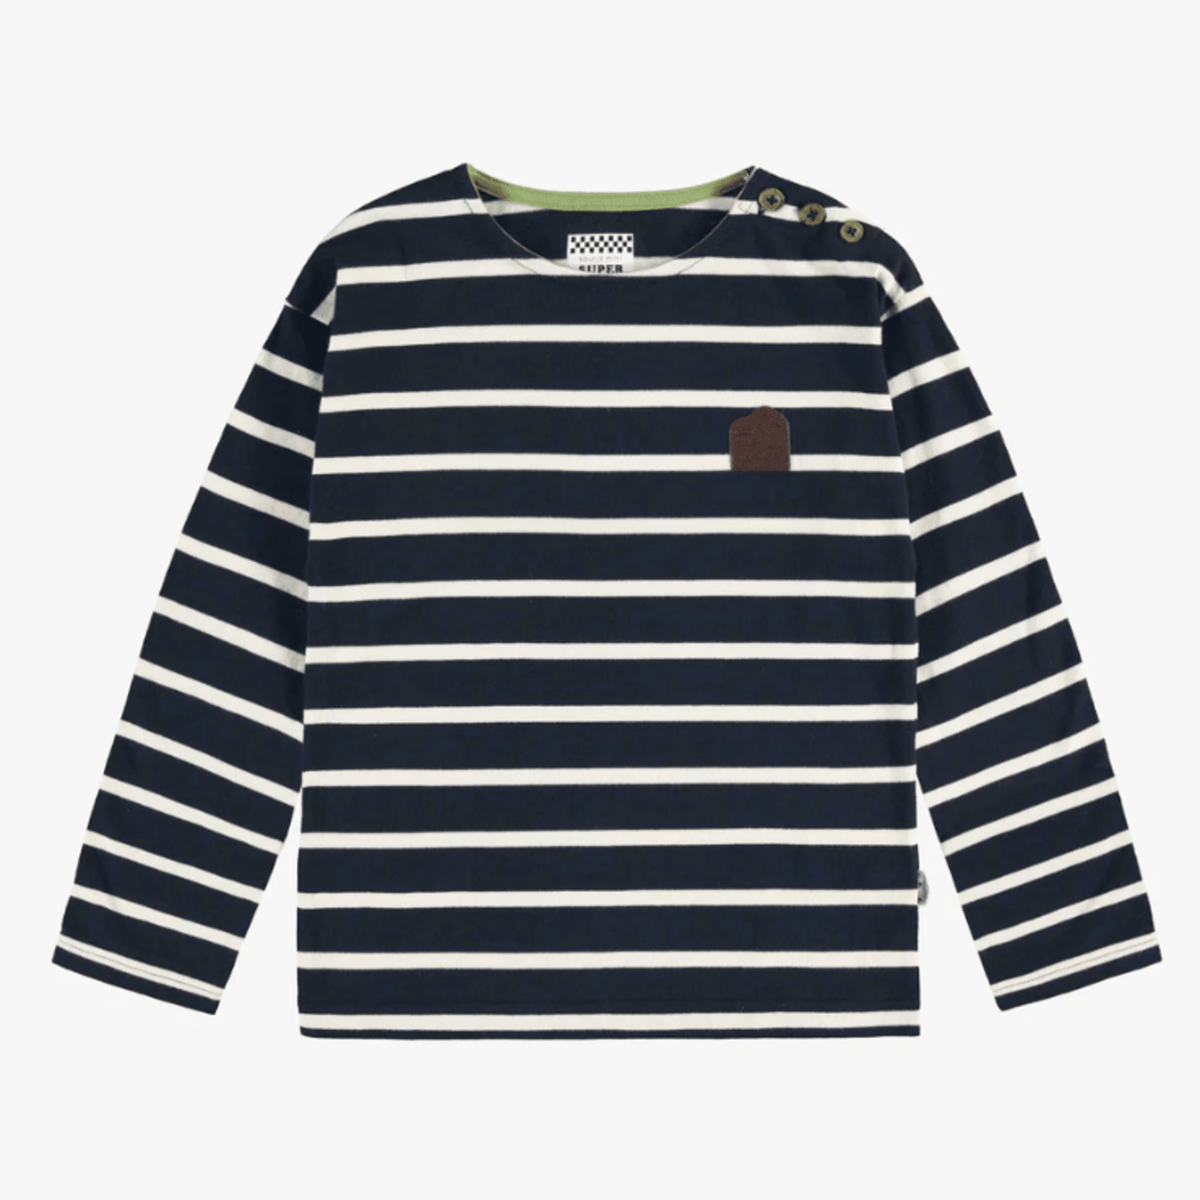 Striped Navy and Cream Long Sleeve Shirt, Child